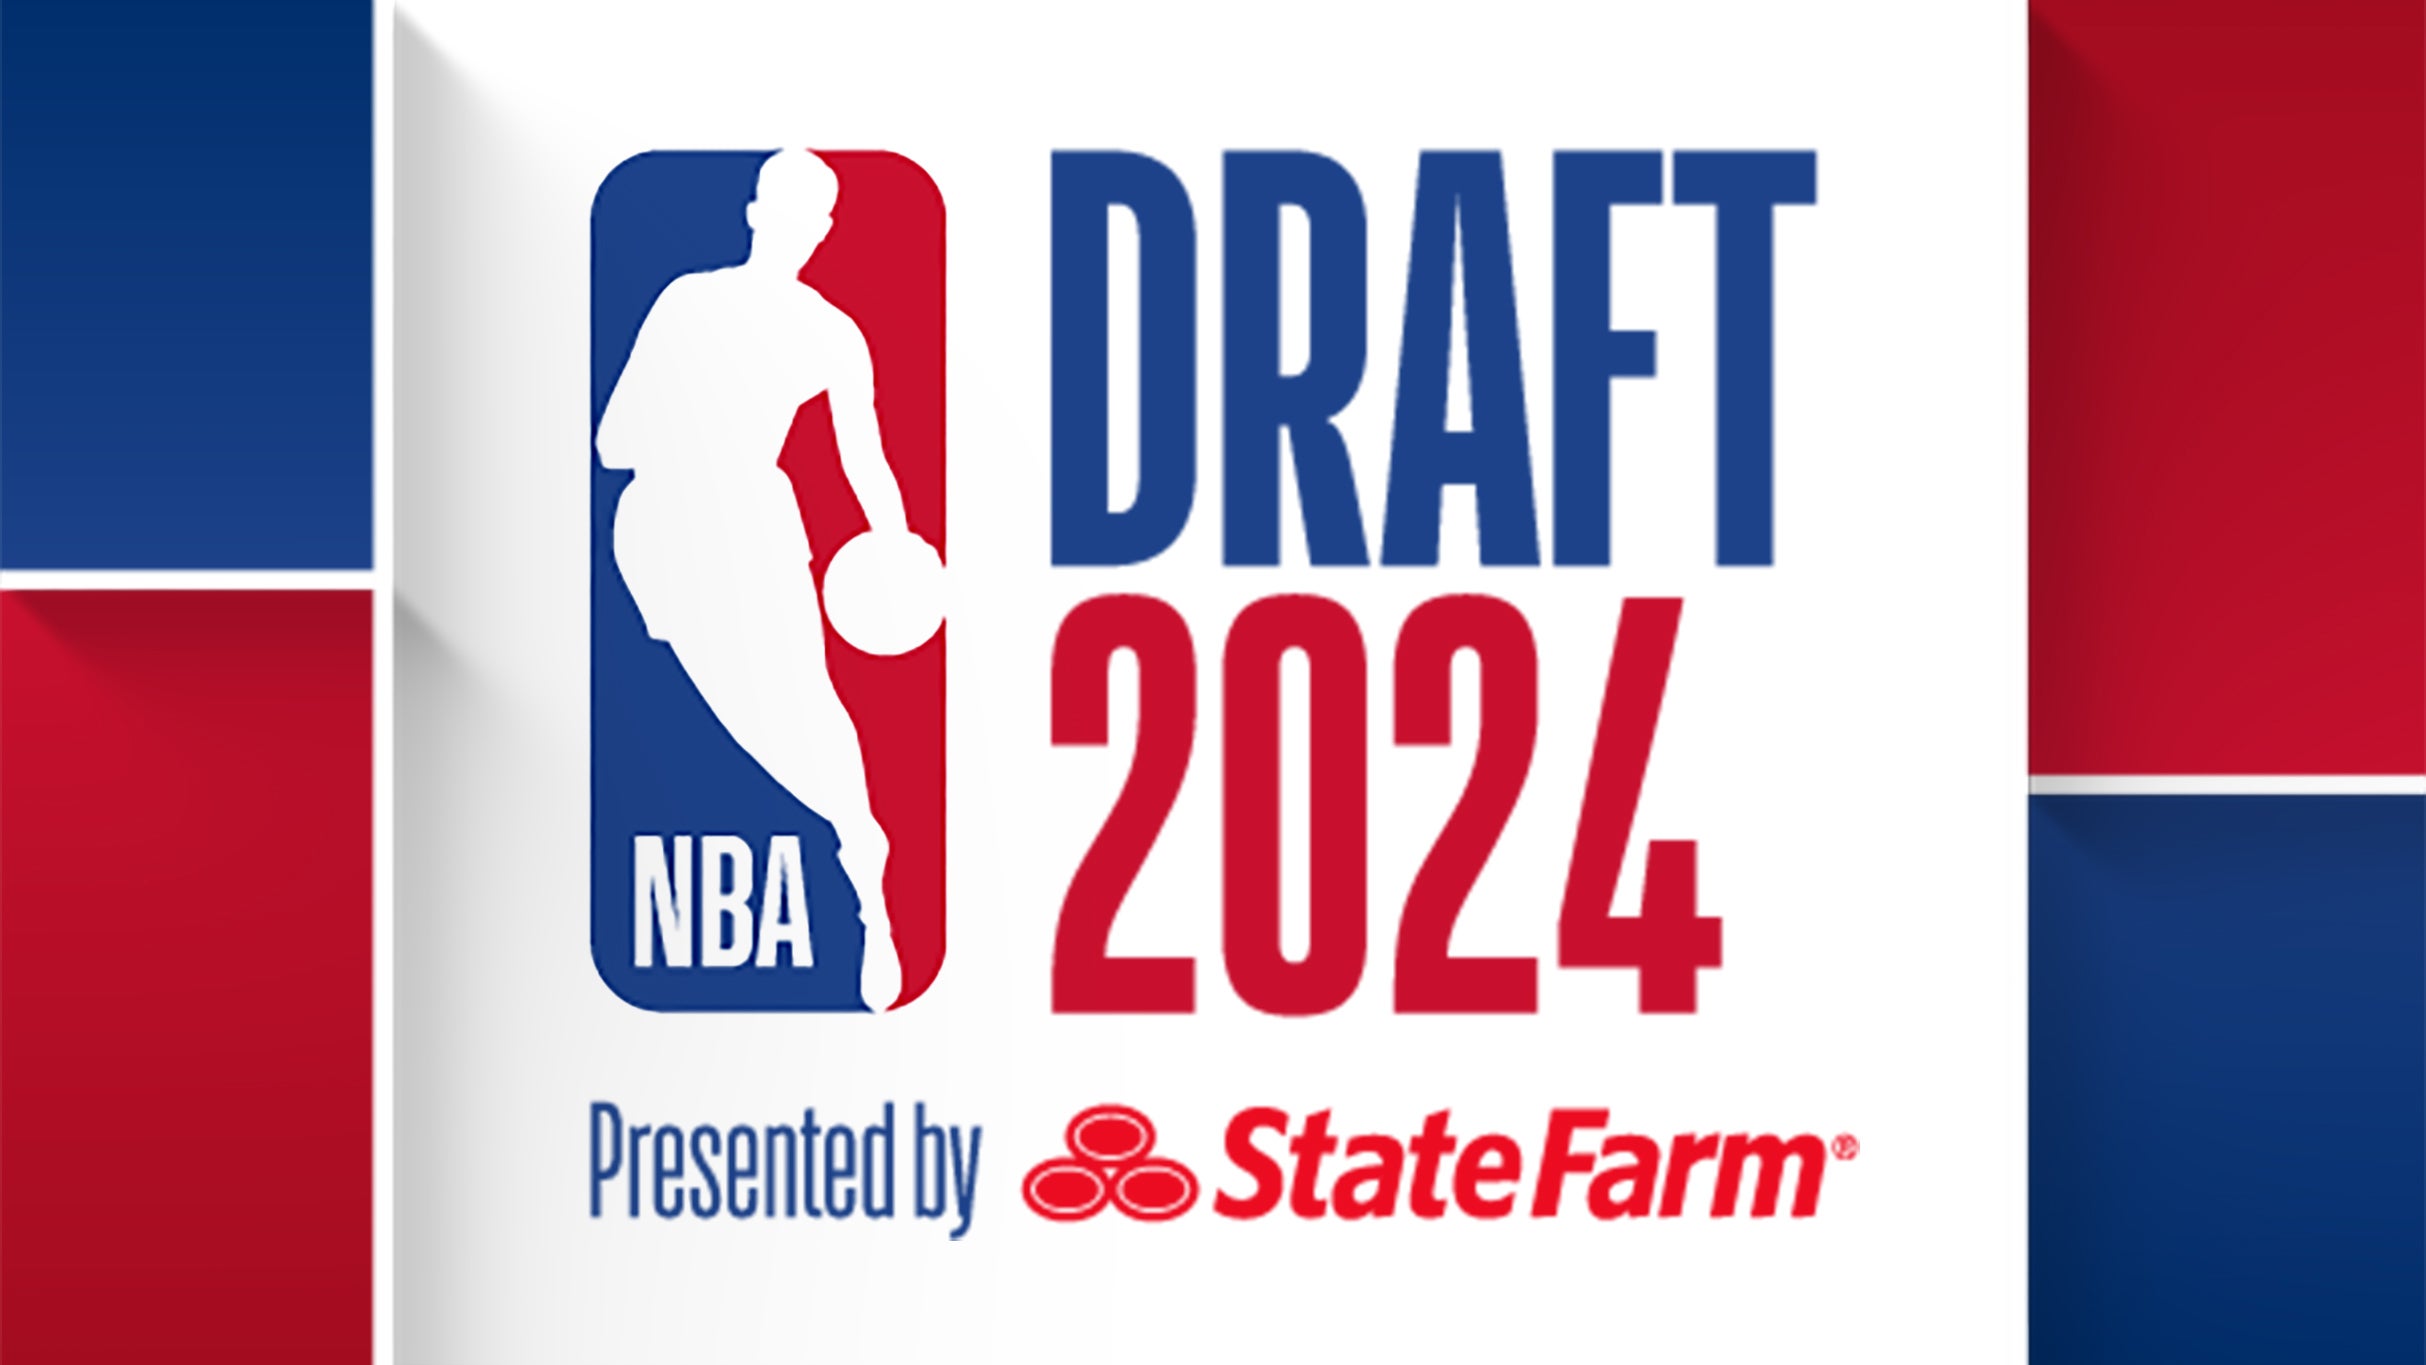 NBA Draft 2024 Presented by State Farm - First Round in Brooklyn promo photo for NBA presale offer code